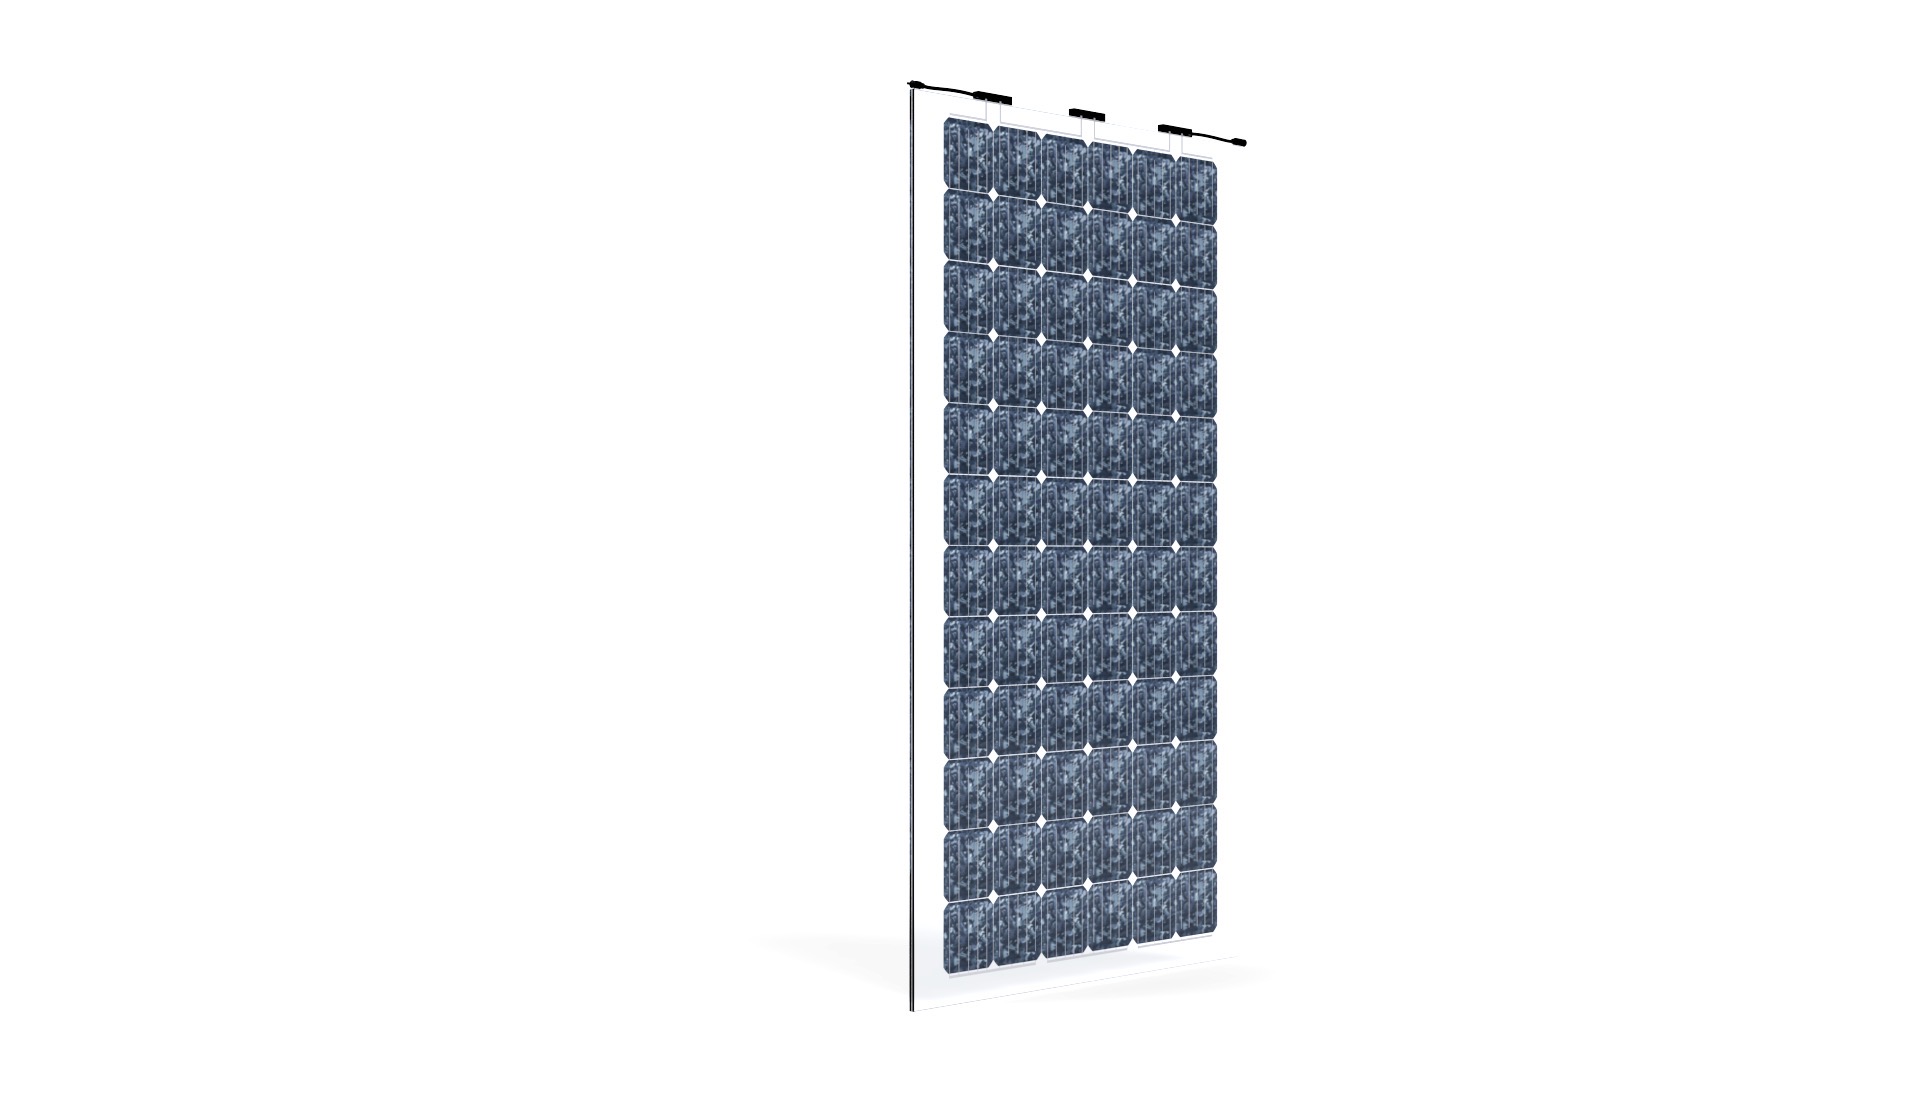 Monocrystalline high performance cell Front glass 4.0 mm SPV solar glass, microstructured, nano-coated, anti-reflective surface Back glass 4.0 mm TVG safety glass, black film, bus bar visible Dimensions H=569mm, W=1000mm , H=9/24mm, weight 11kg Junction box split version IP68, MC4 connector, 800mm cable length, 4m m²